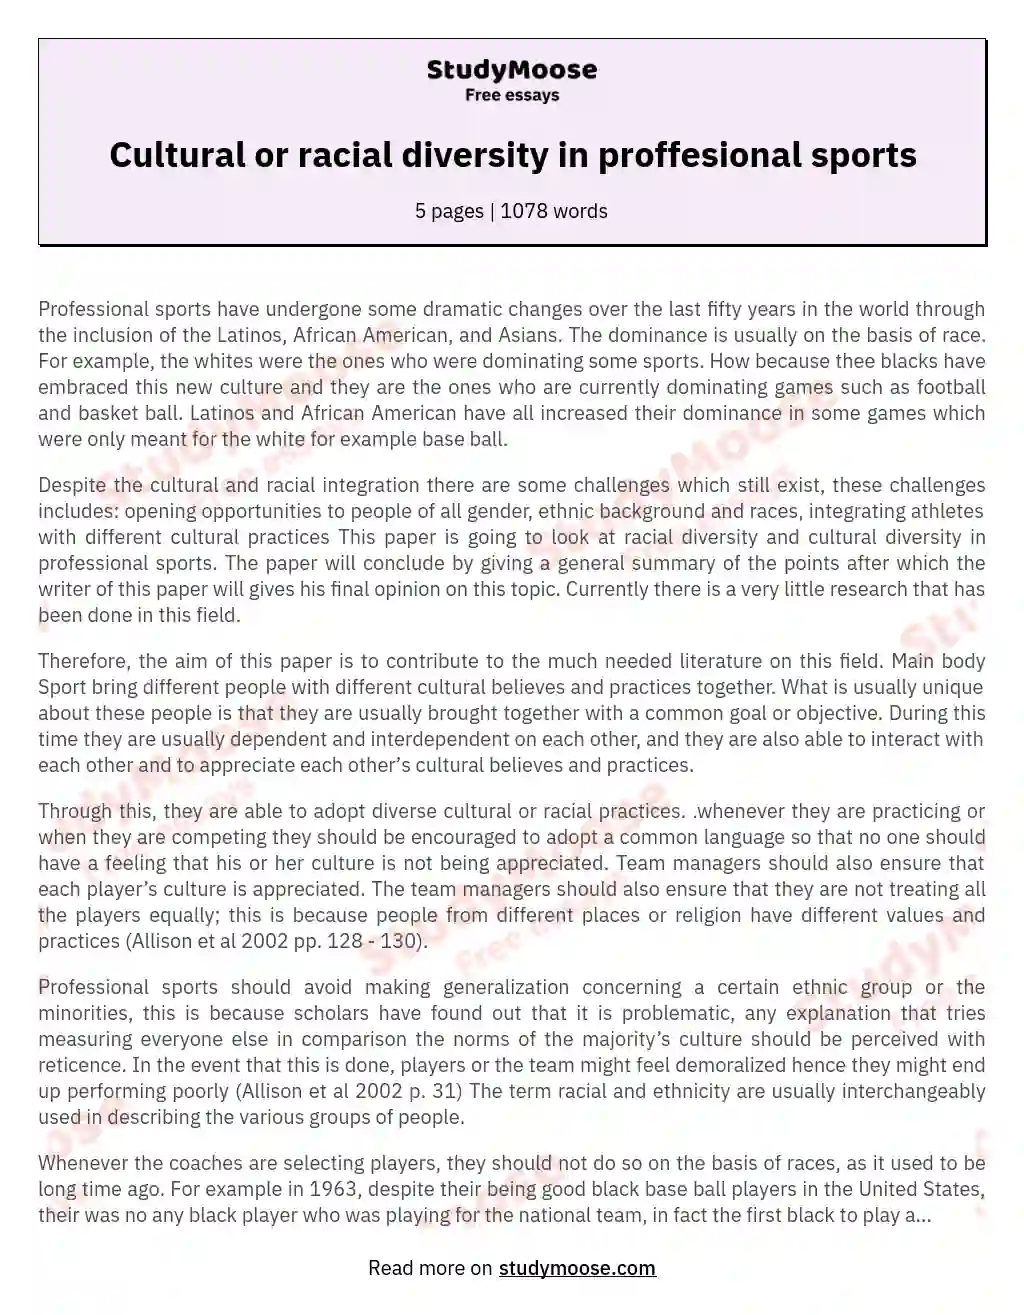 Cultural or racial diversity in proffesional sports essay